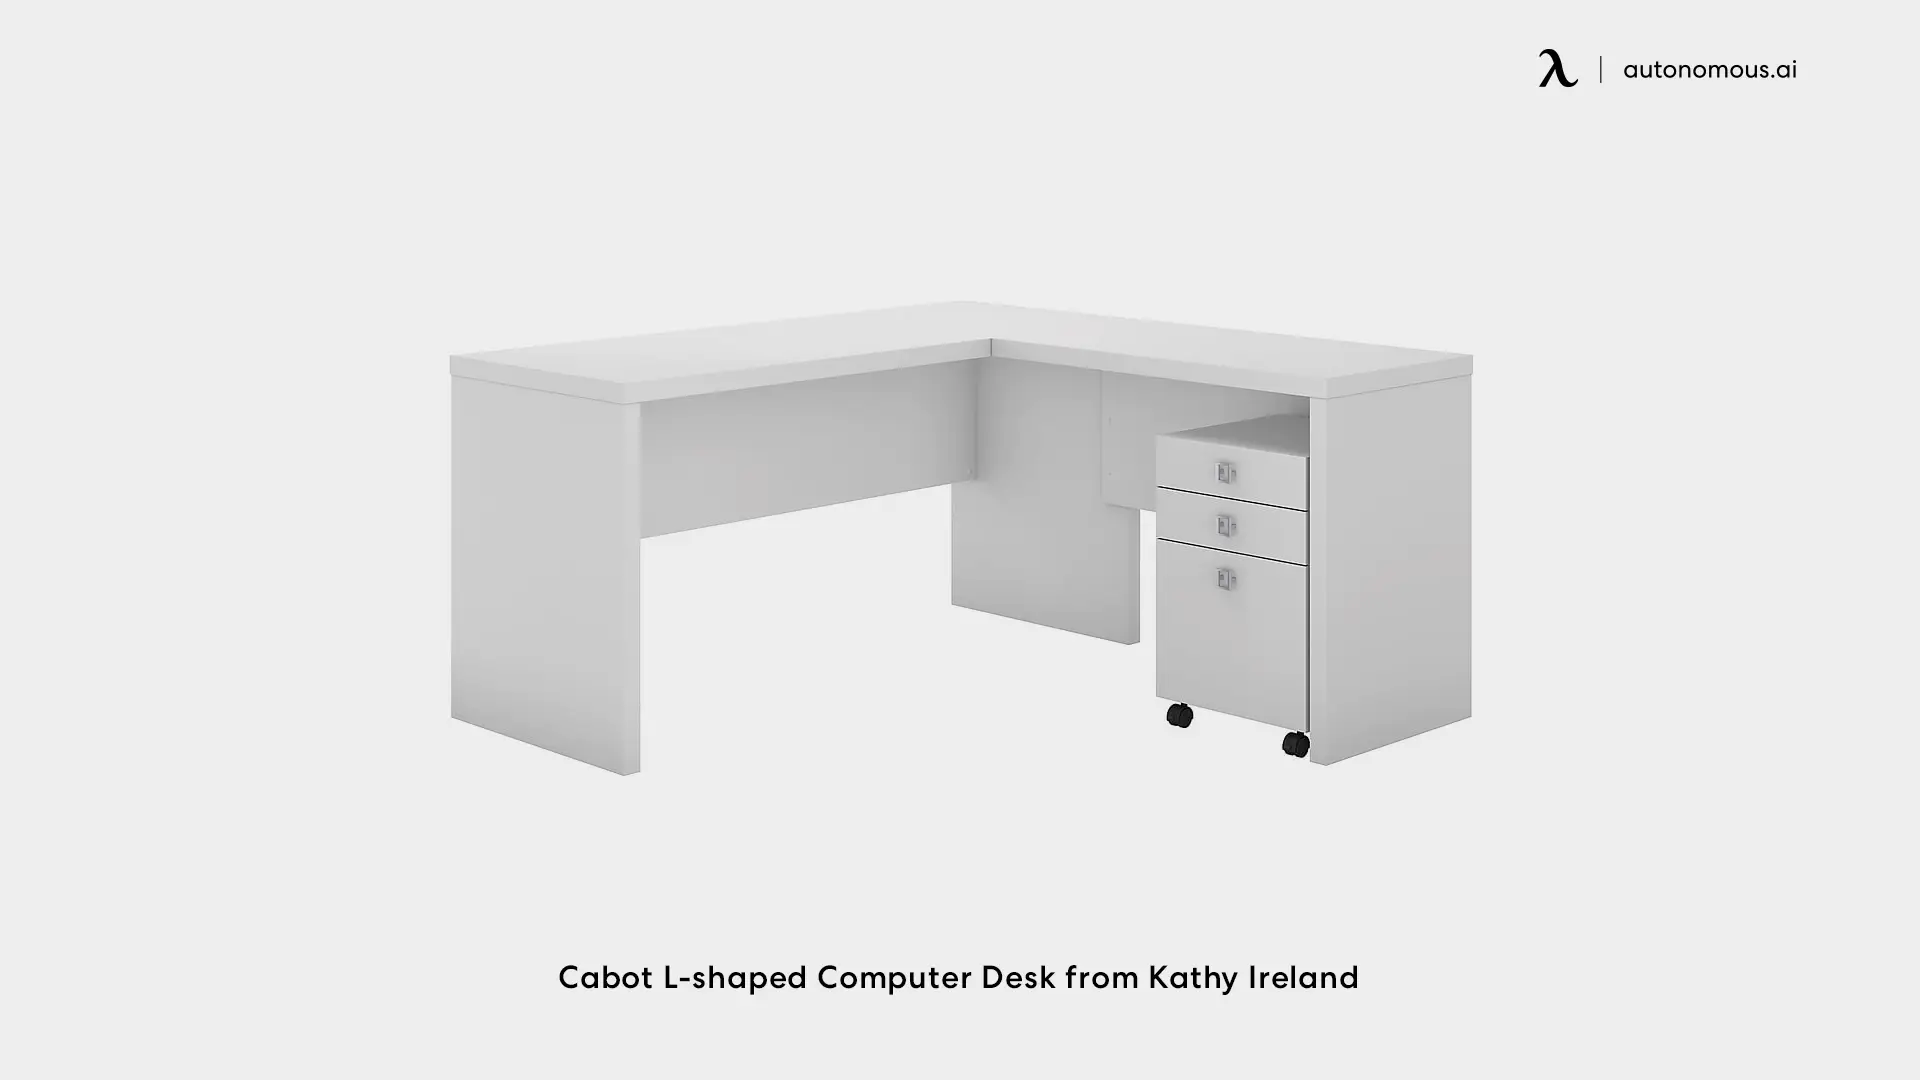 Cabot L-shaped Computer Desk from Kathy Ireland